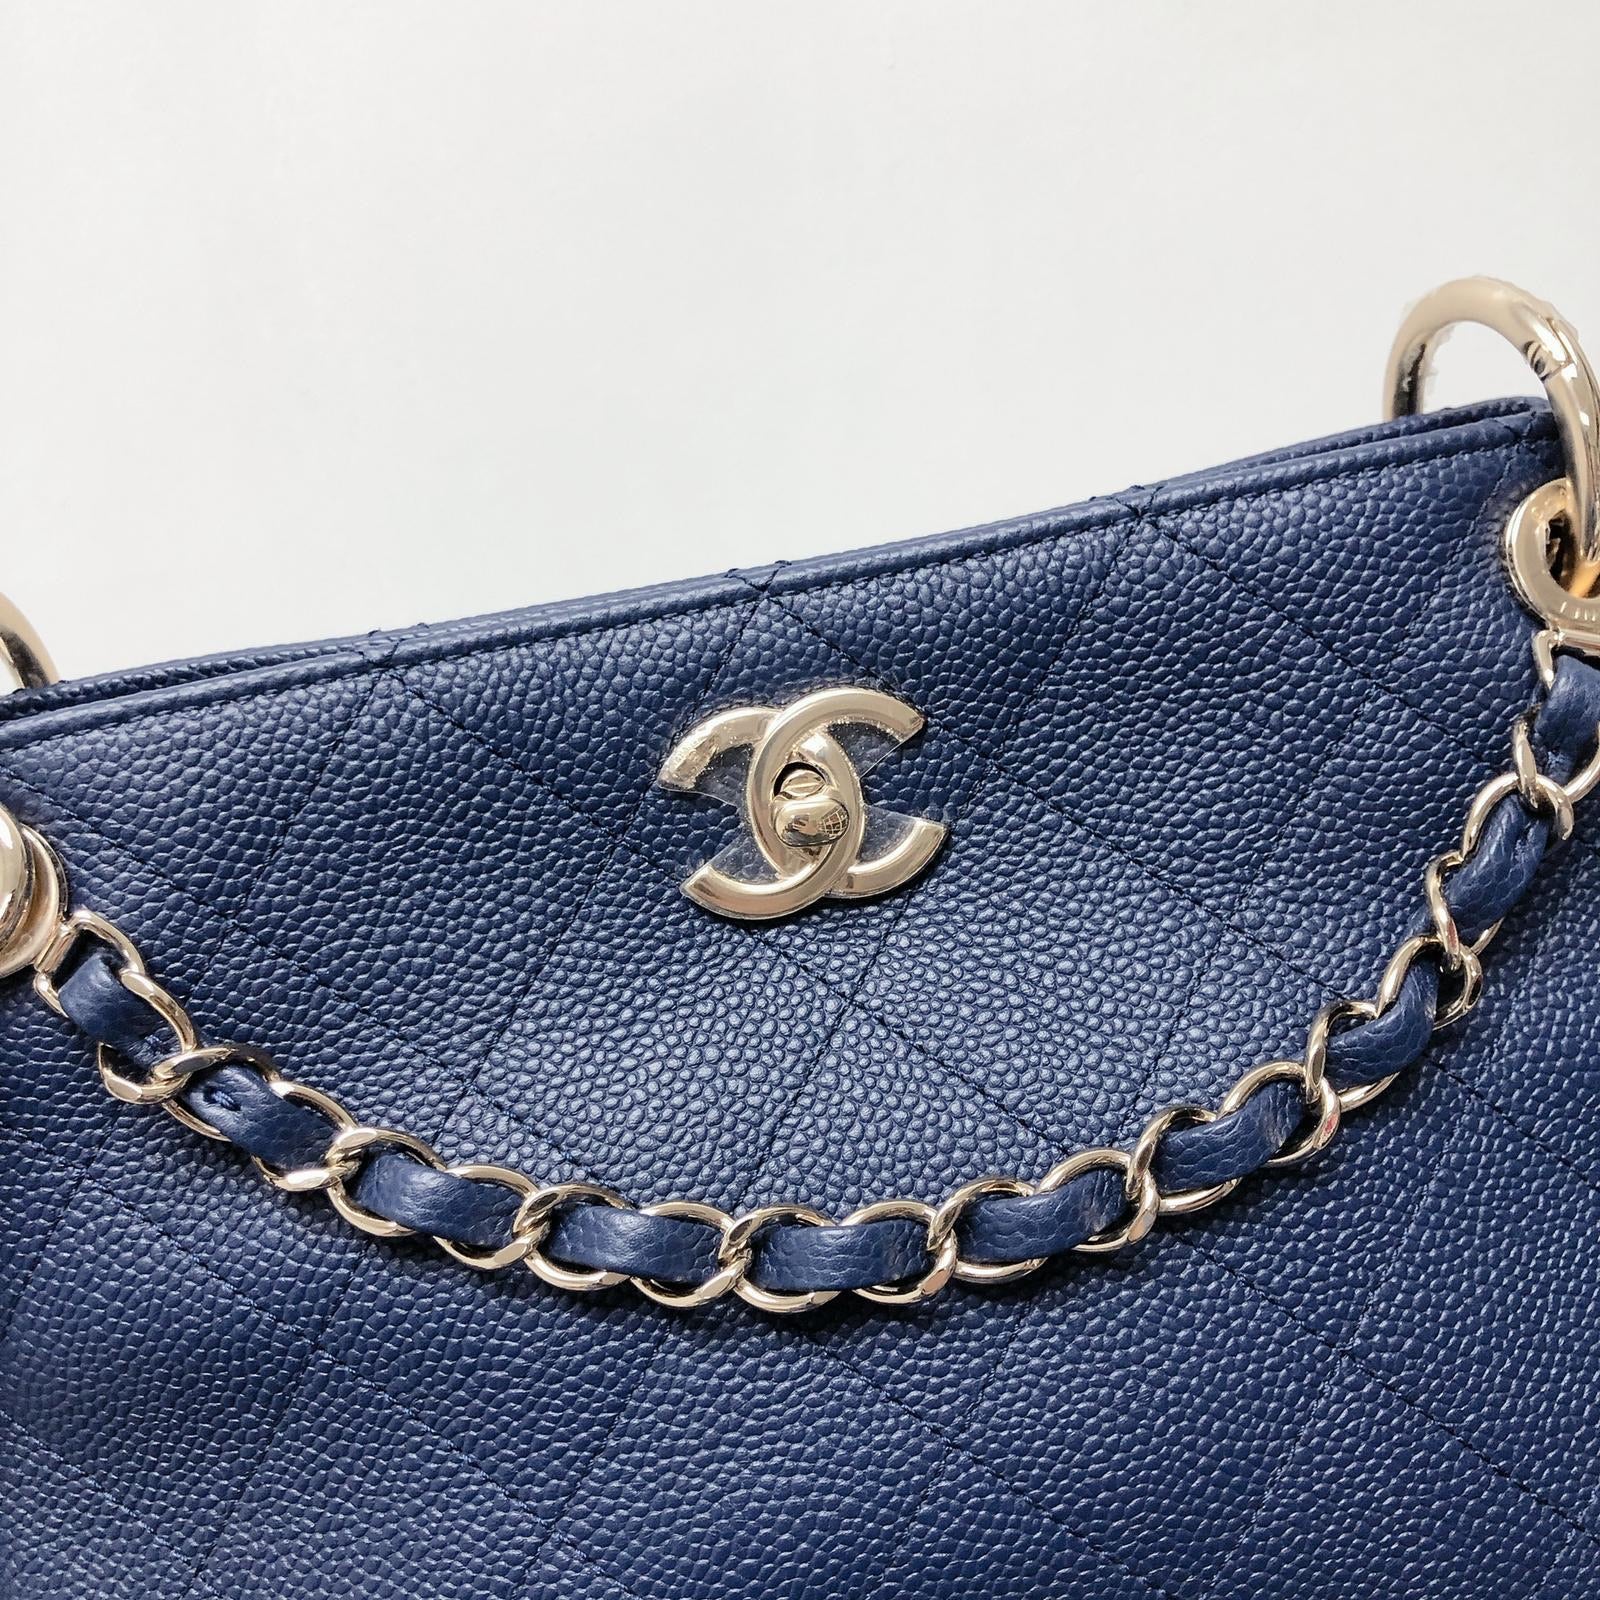 CHANEL Two Way Crossbody Tote